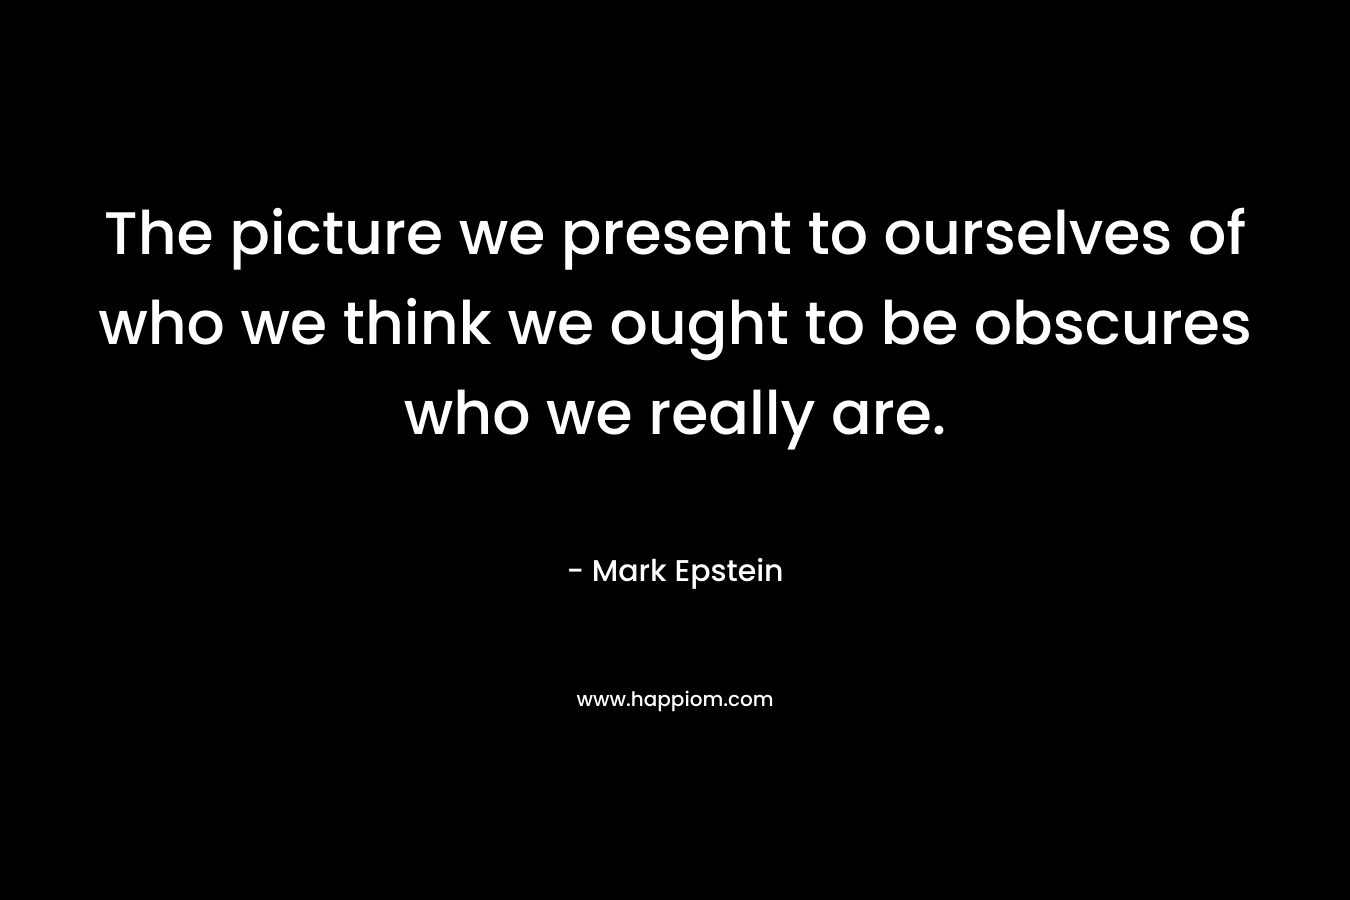 The picture we present to ourselves of who we think we ought to be obscures who we really are. – Mark Epstein